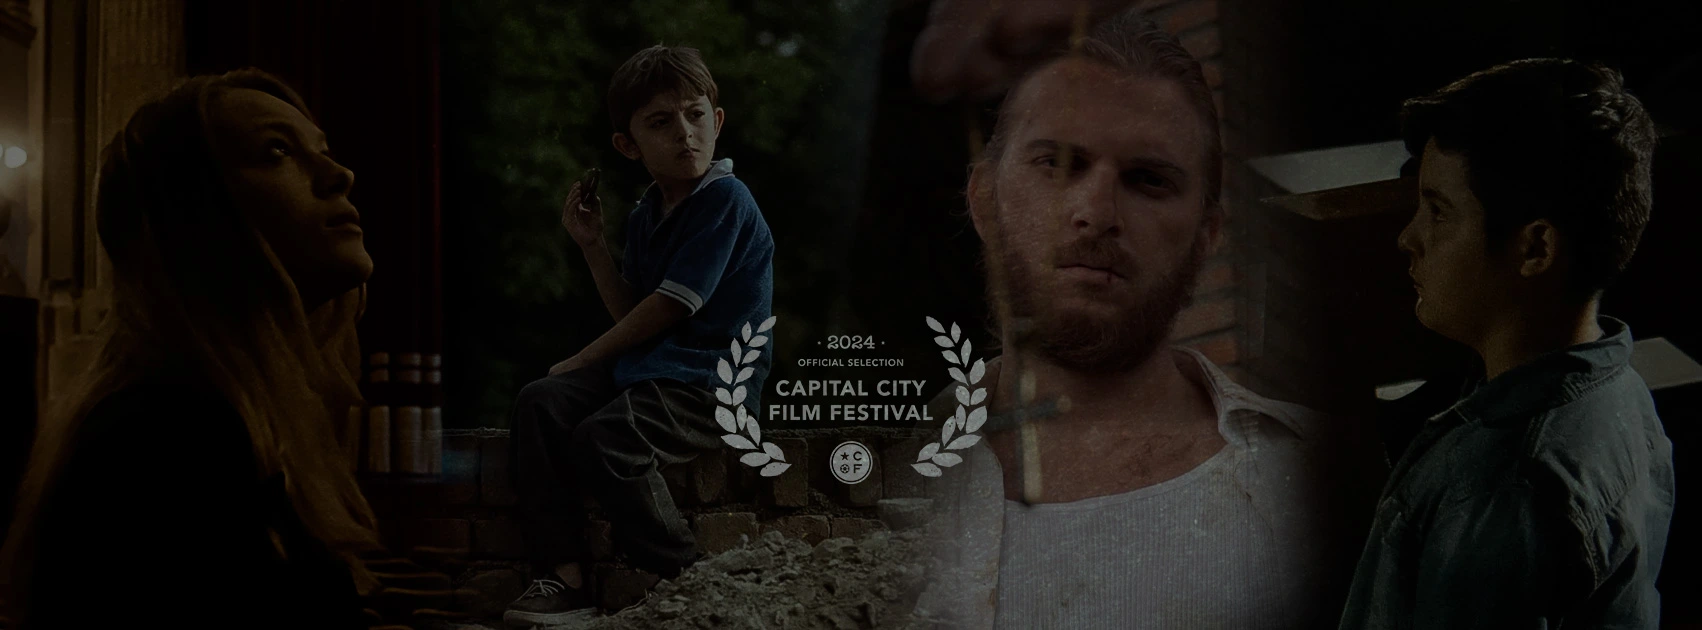 Four Alpha distribution' short films are in competition at Capital City Film Festival